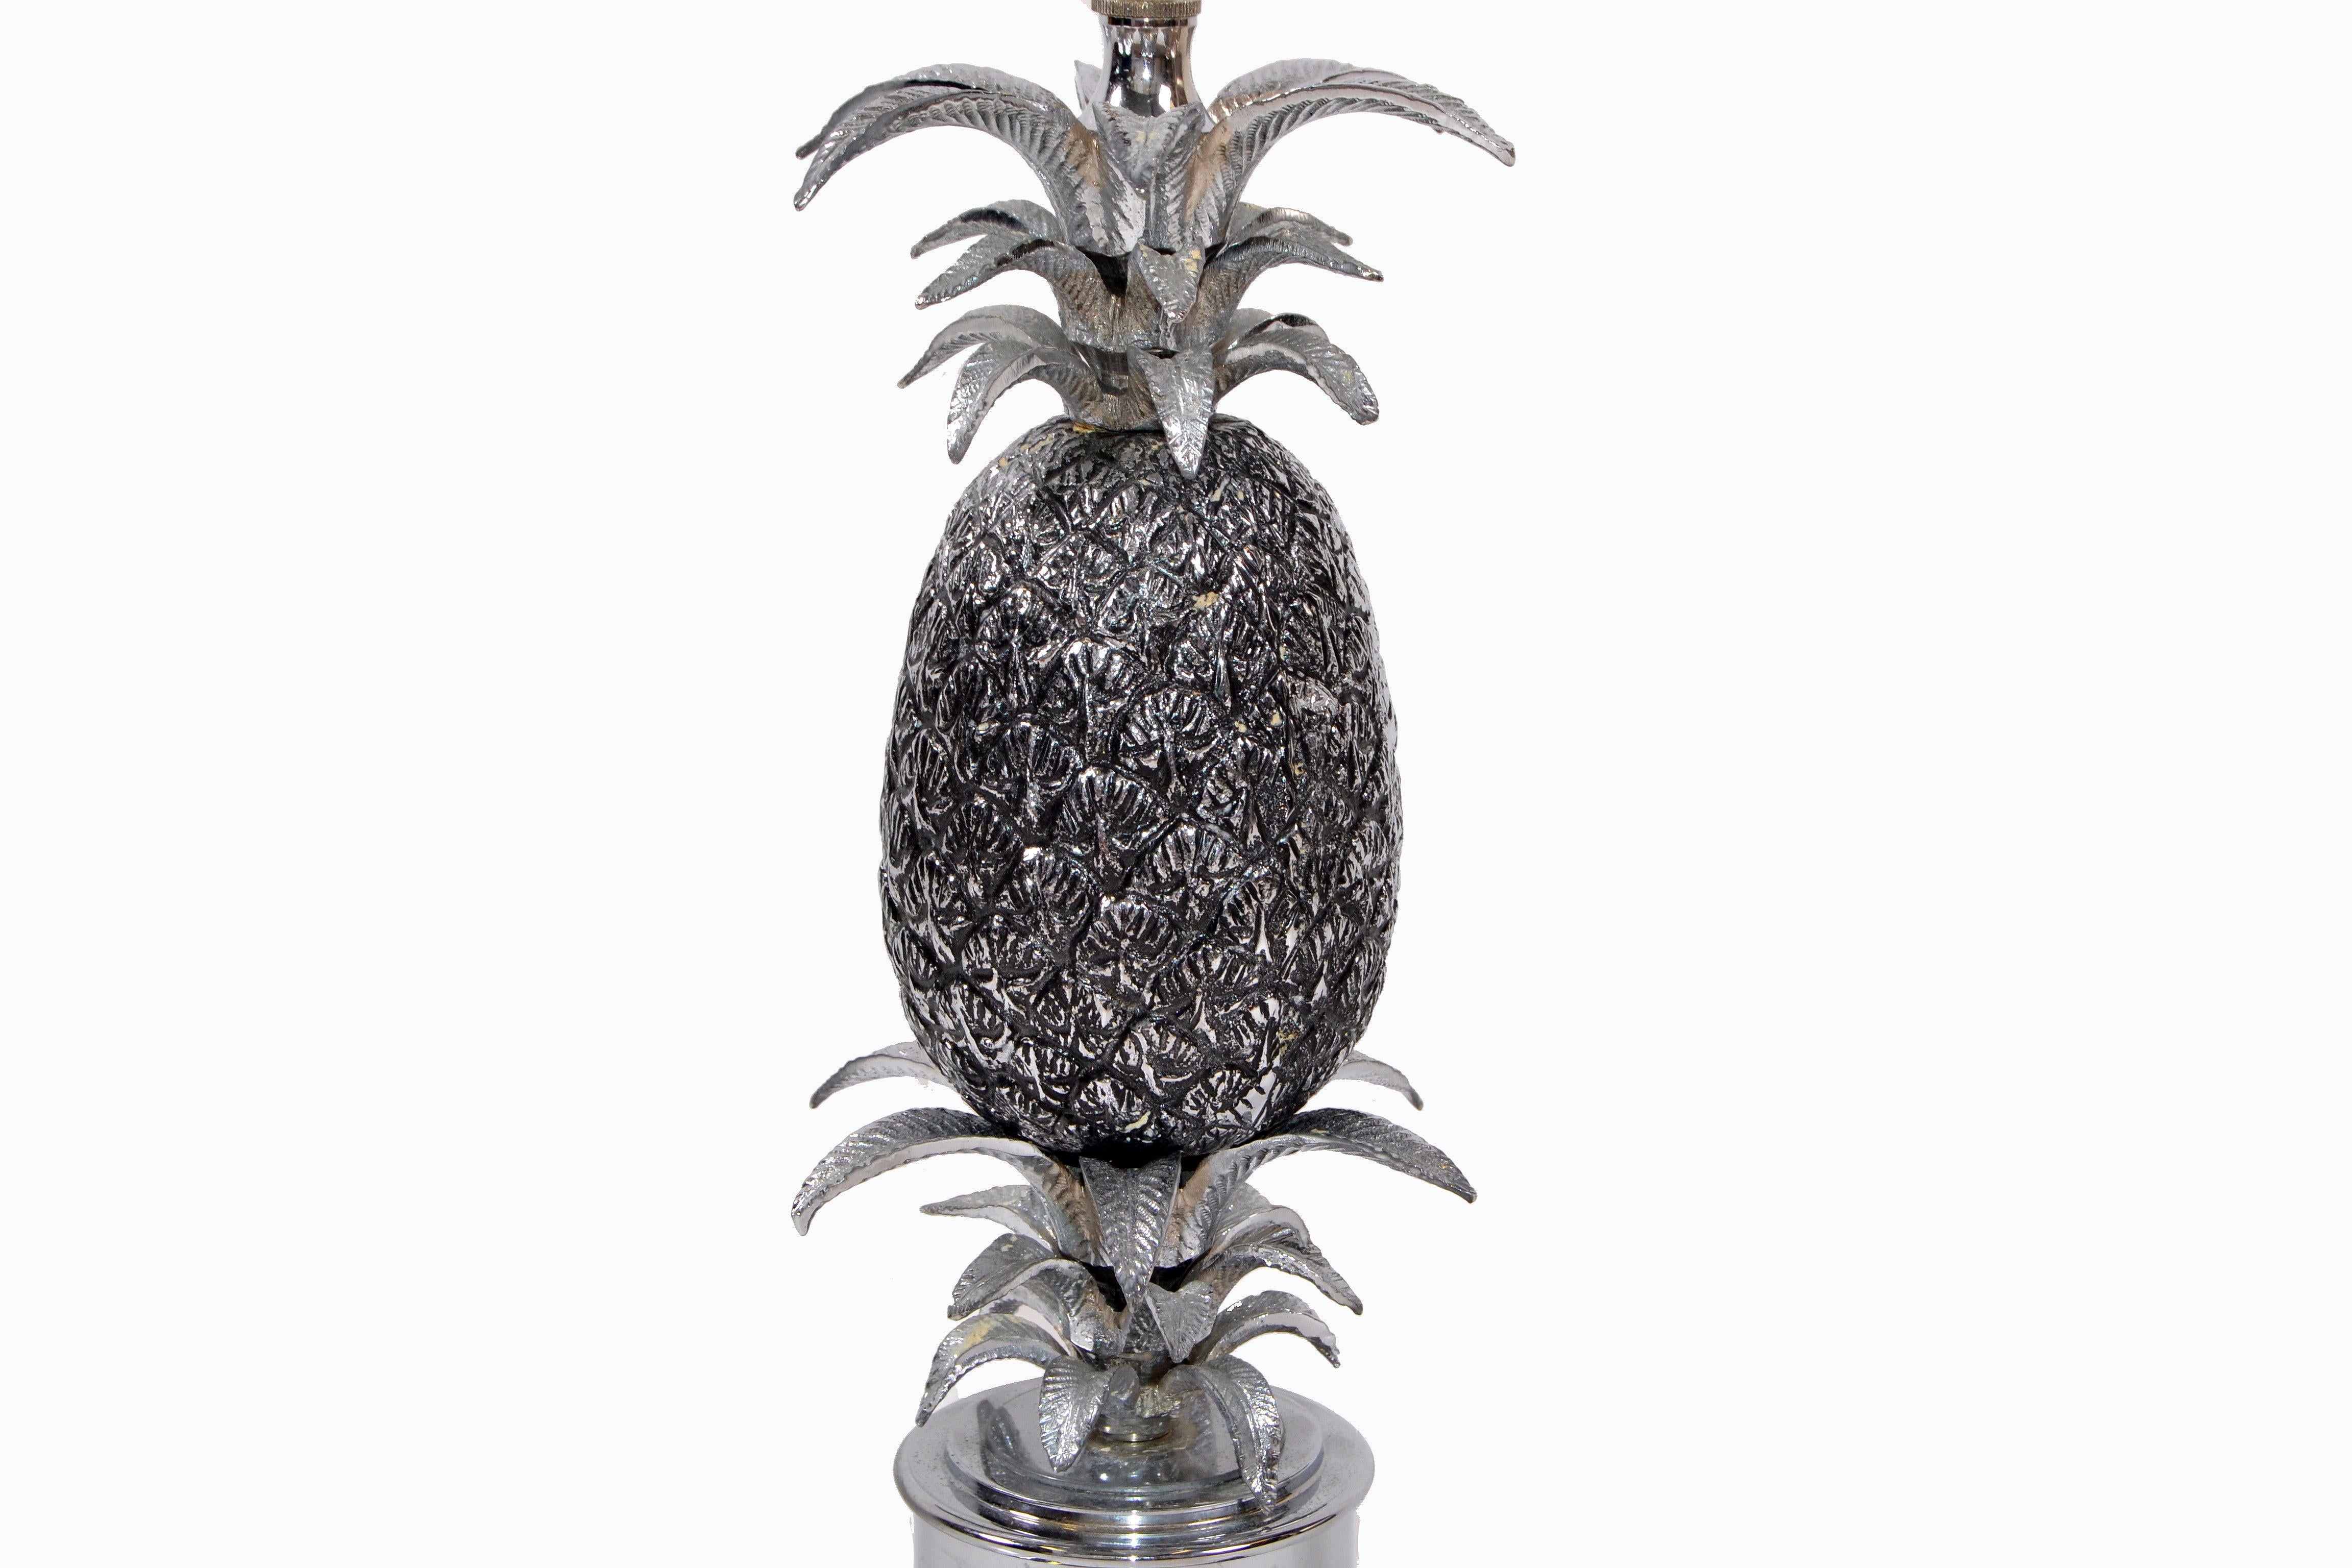 Polished Maison Charles Chrome and Nickel Pineapple Table Lamp French Provincial 1960s For Sale